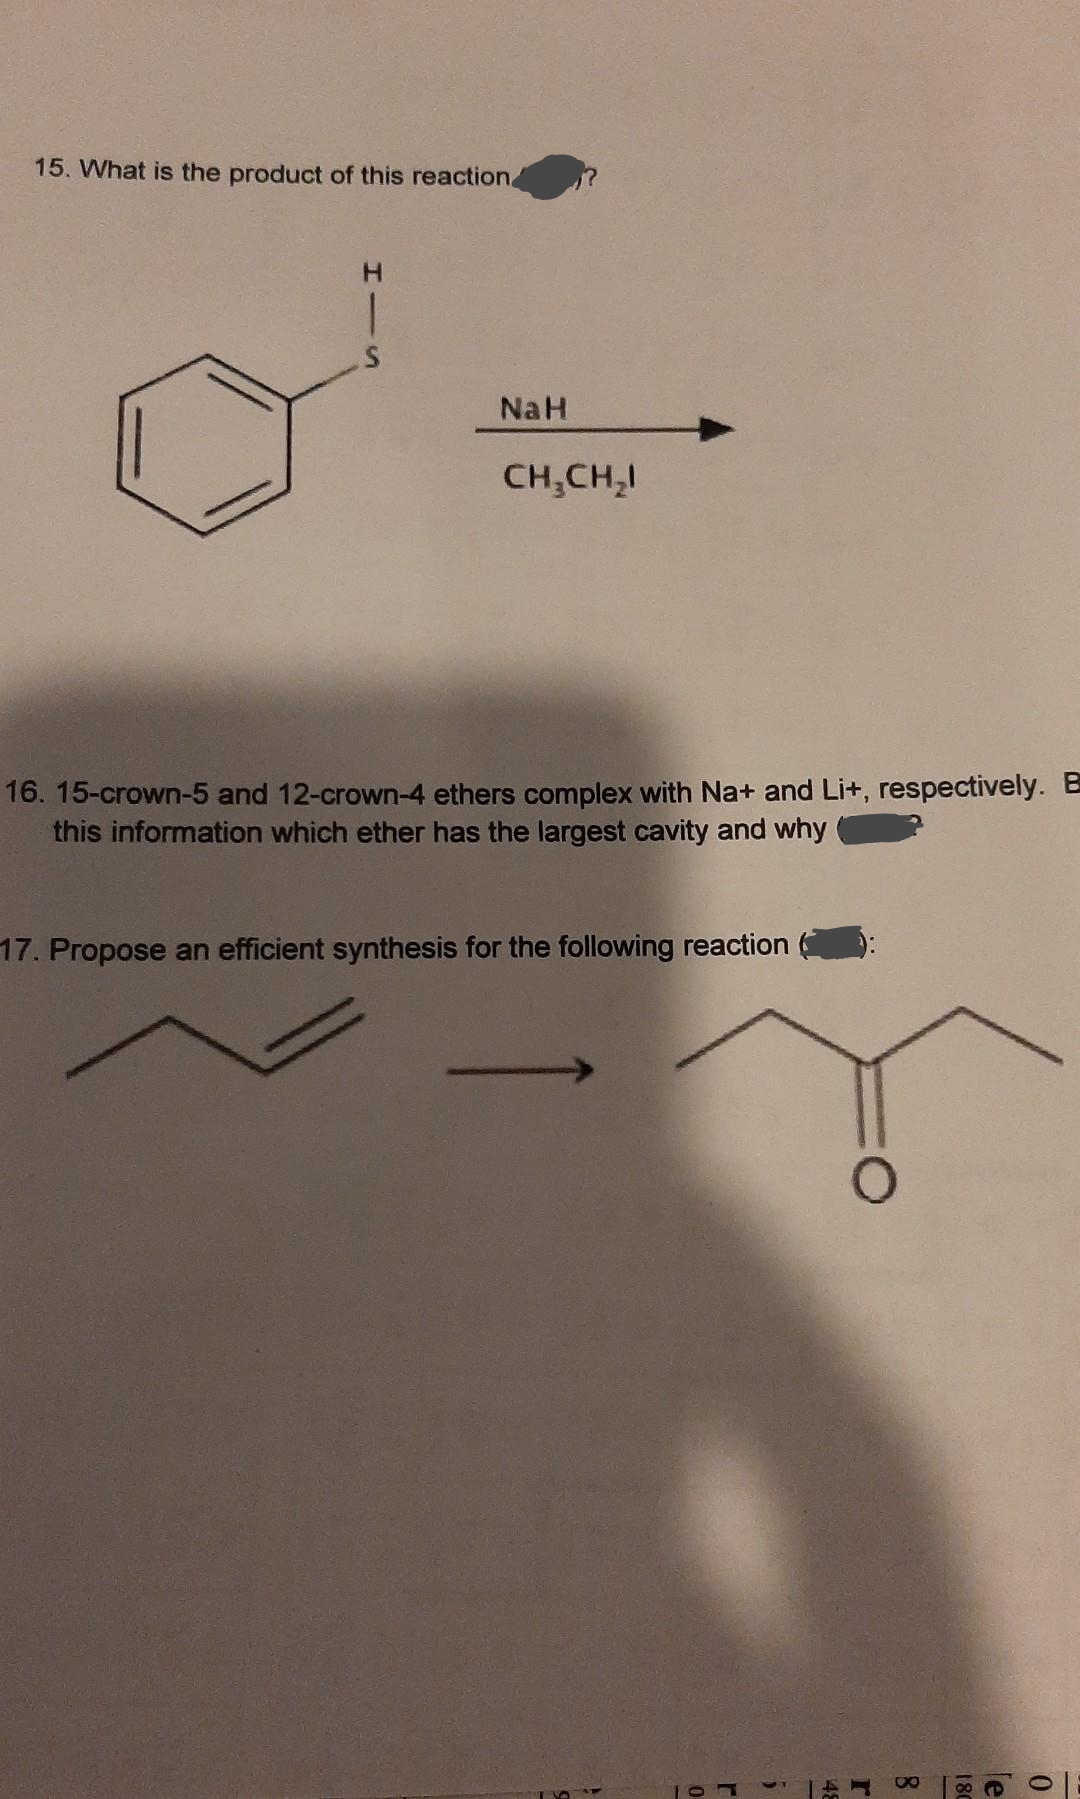 15. What is the product of this reaction
S
NaH
CH₂CH₂
16. 15-crown-5 and 12-crown-4 ethers complex with Na+ and Li+, respectively. B
this information which ether has the largest cavity and why
17. Propose an efficient synthesis for the following reaction
}
0
r
5
48
r
8
180
le